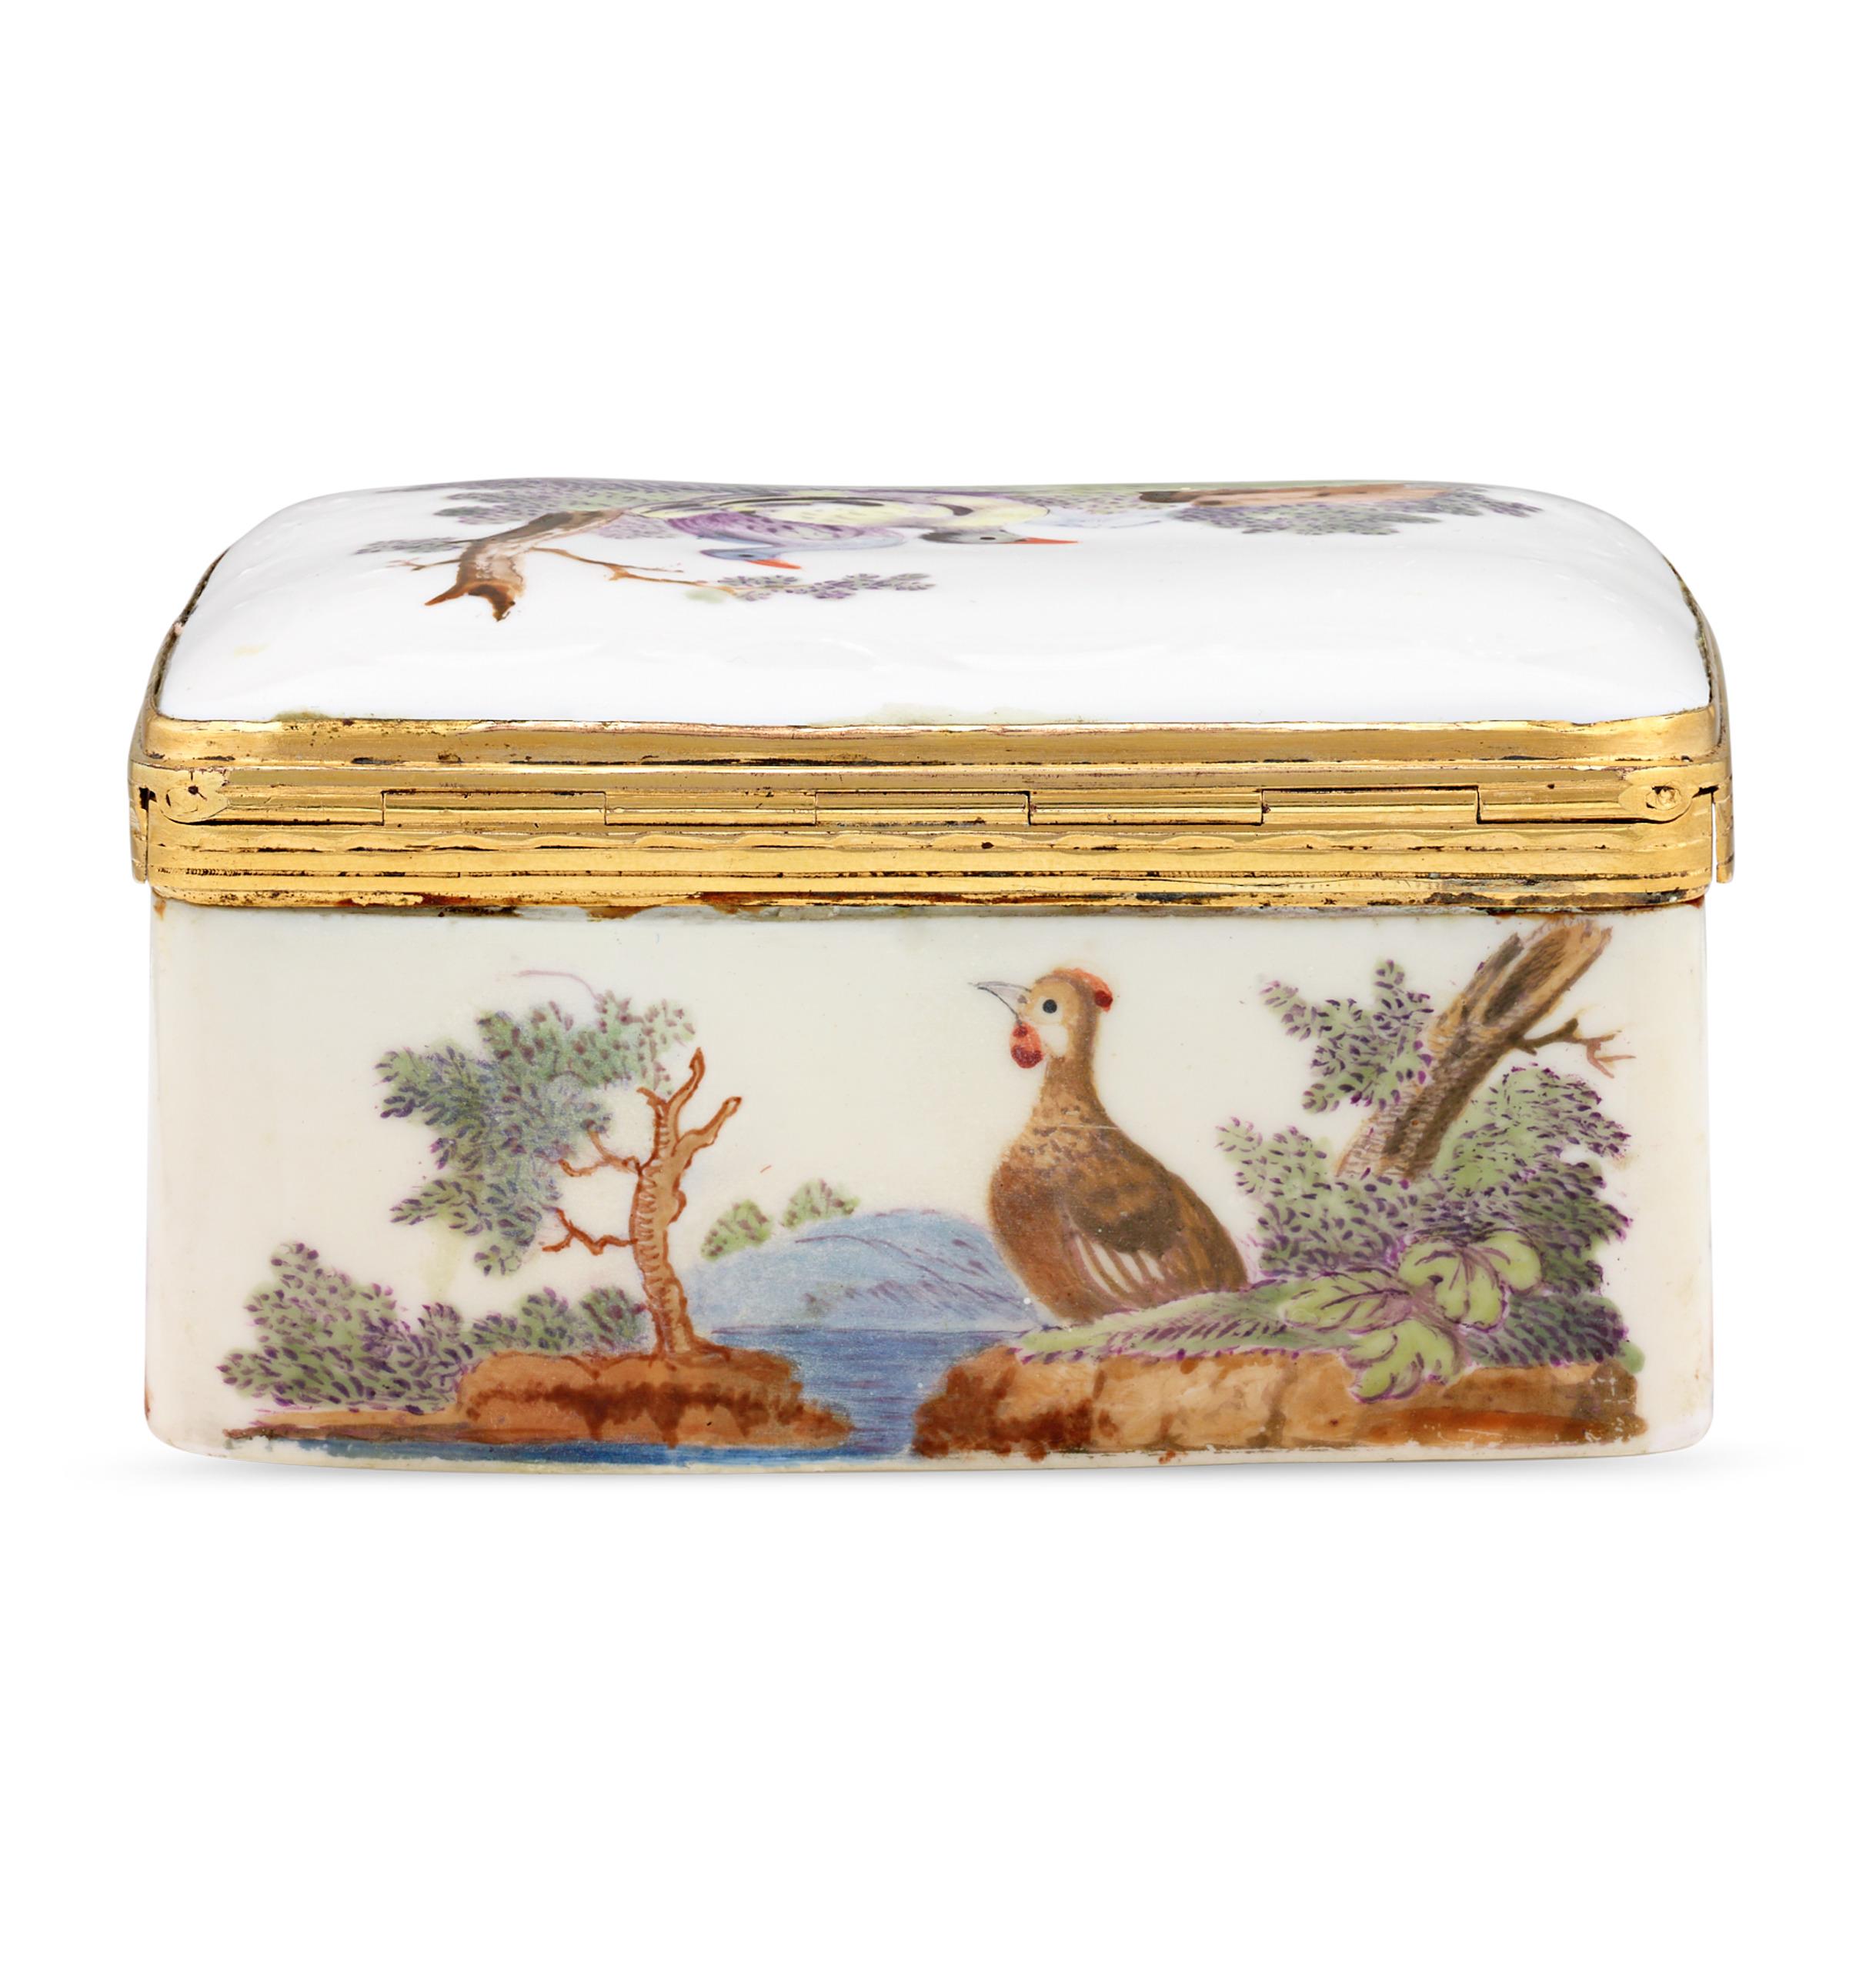 German Porcelain Box In Excellent Condition For Sale In New Orleans, LA